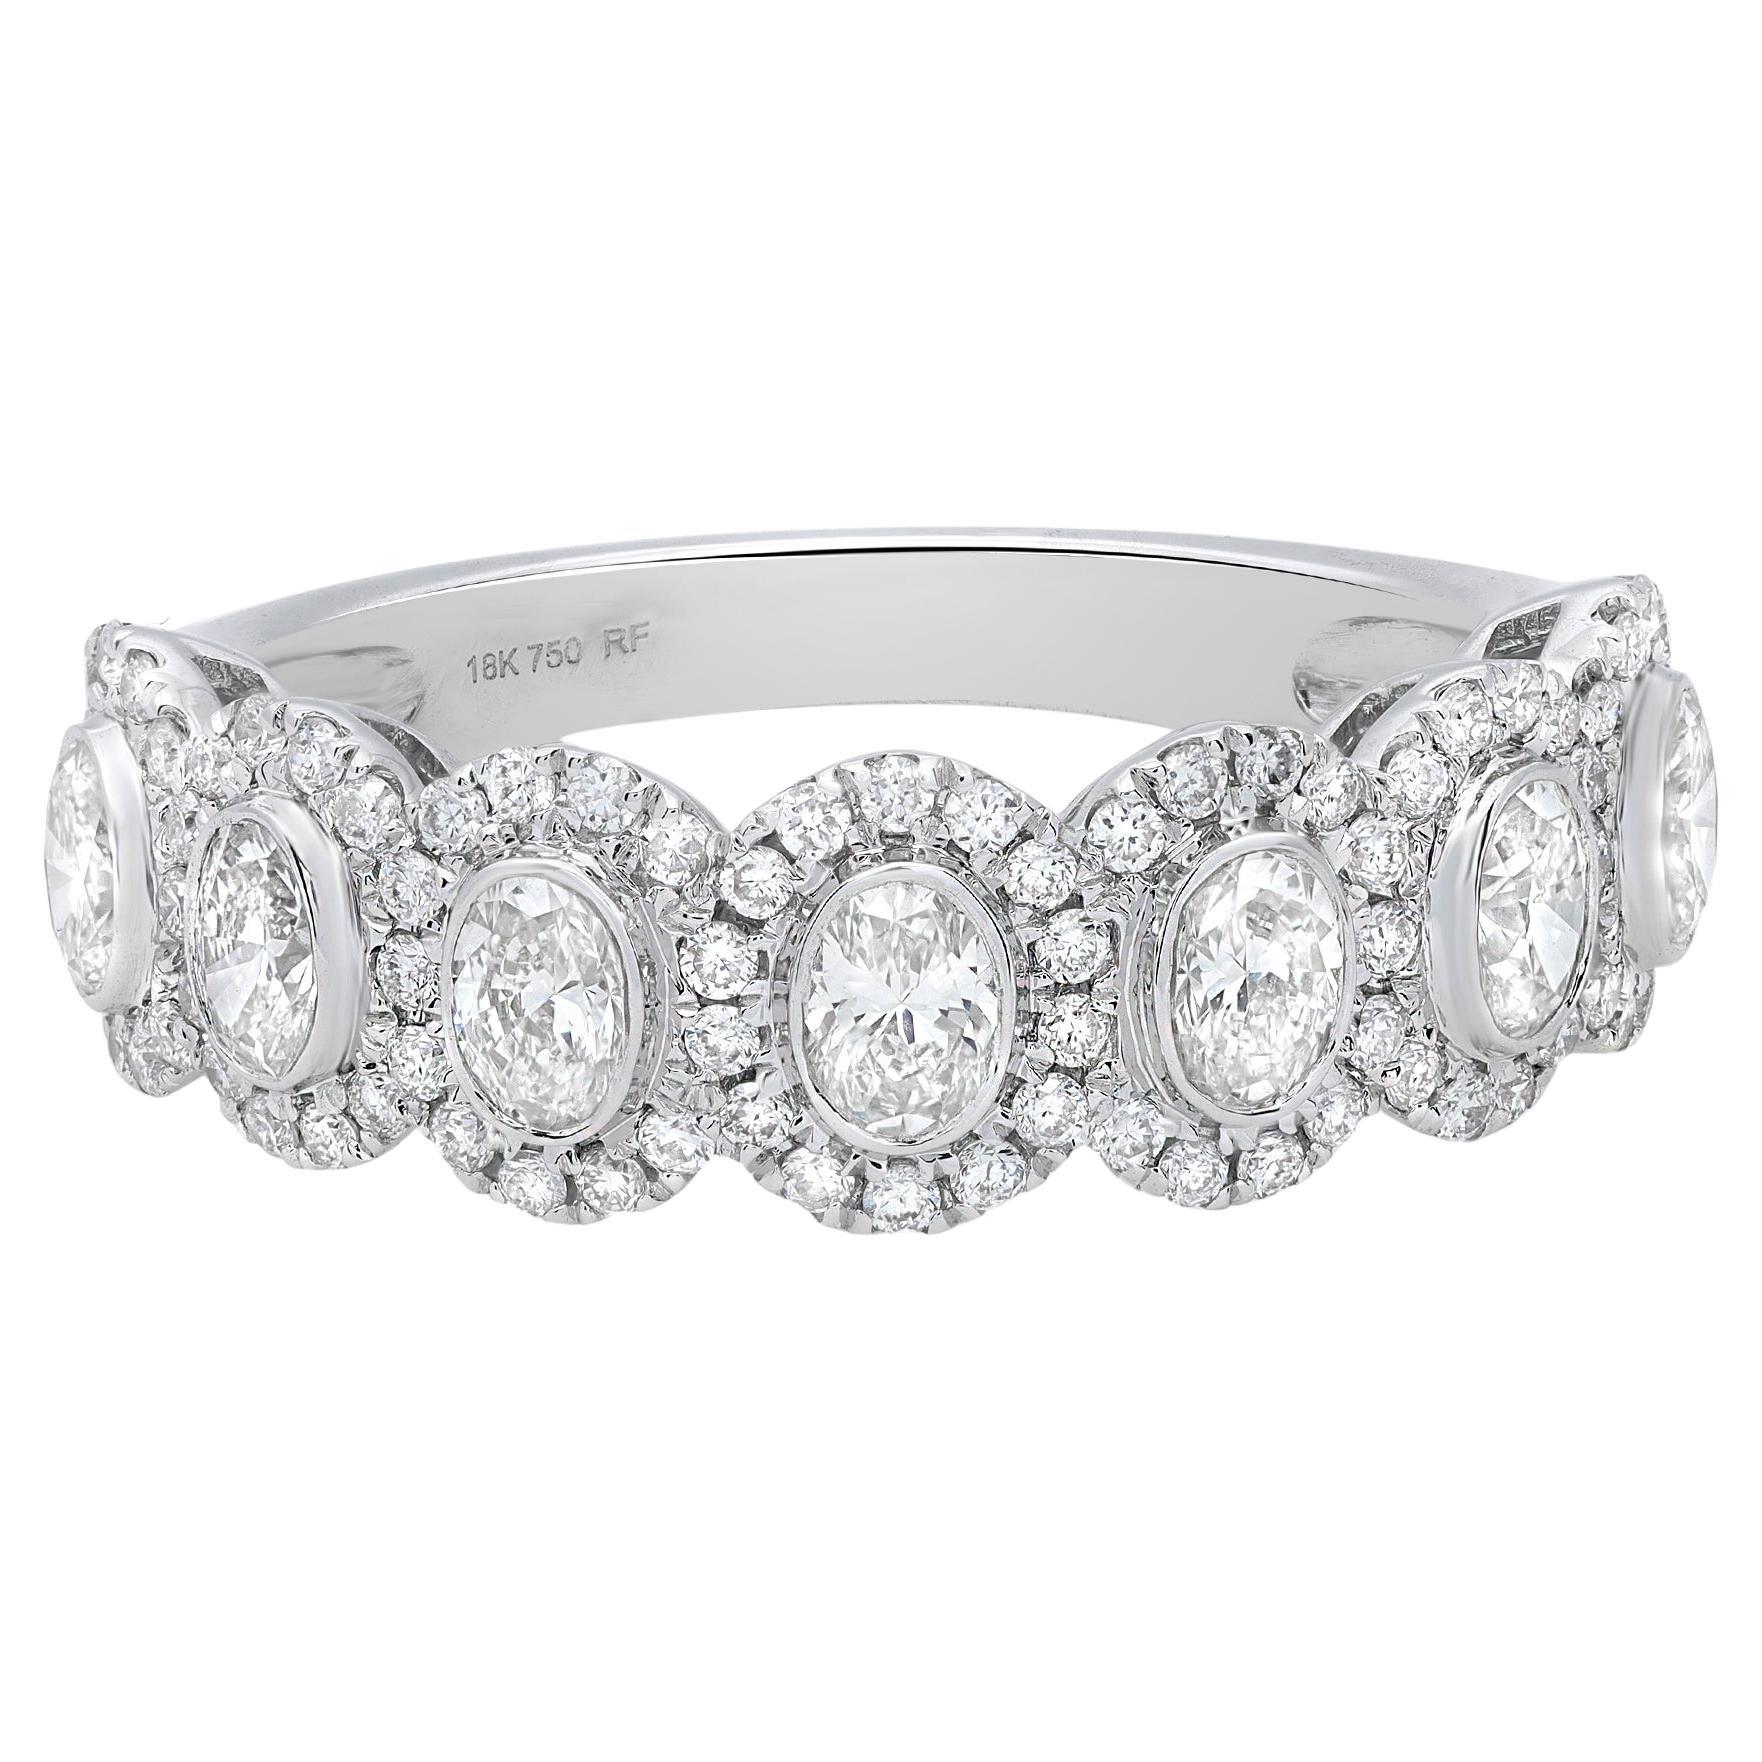 1.33Cttw Oval Cut Diamond Halo Wedding Band Ring 18K White Gold Size 6.5 For Sale